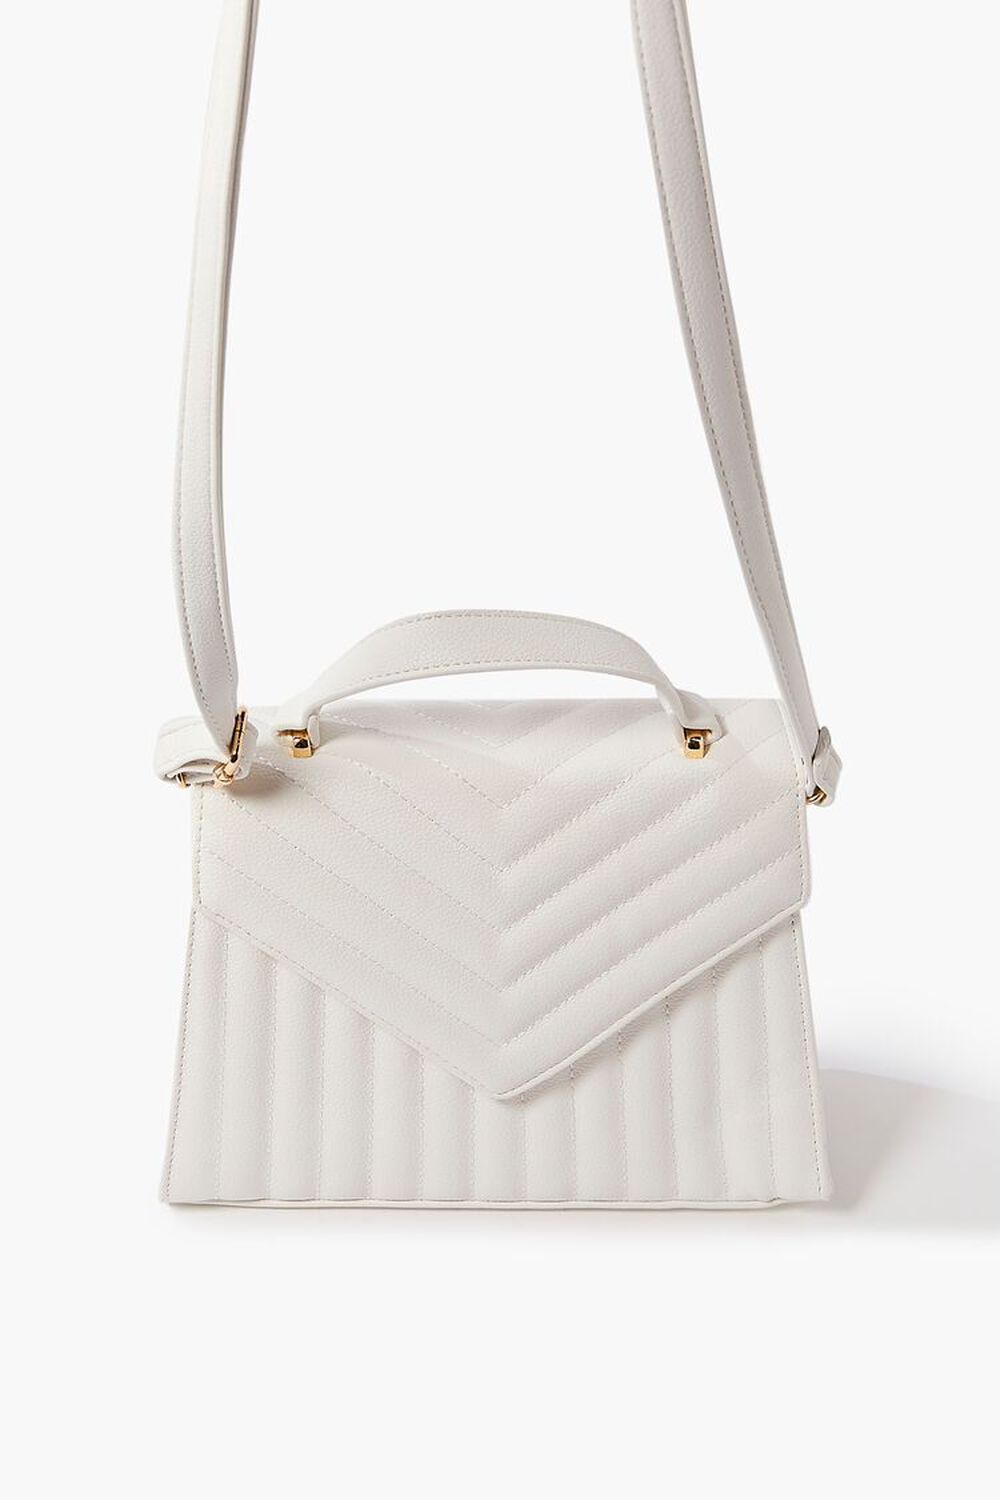 WHITE Quilted Chevron Faux Leather Satchel, image 3